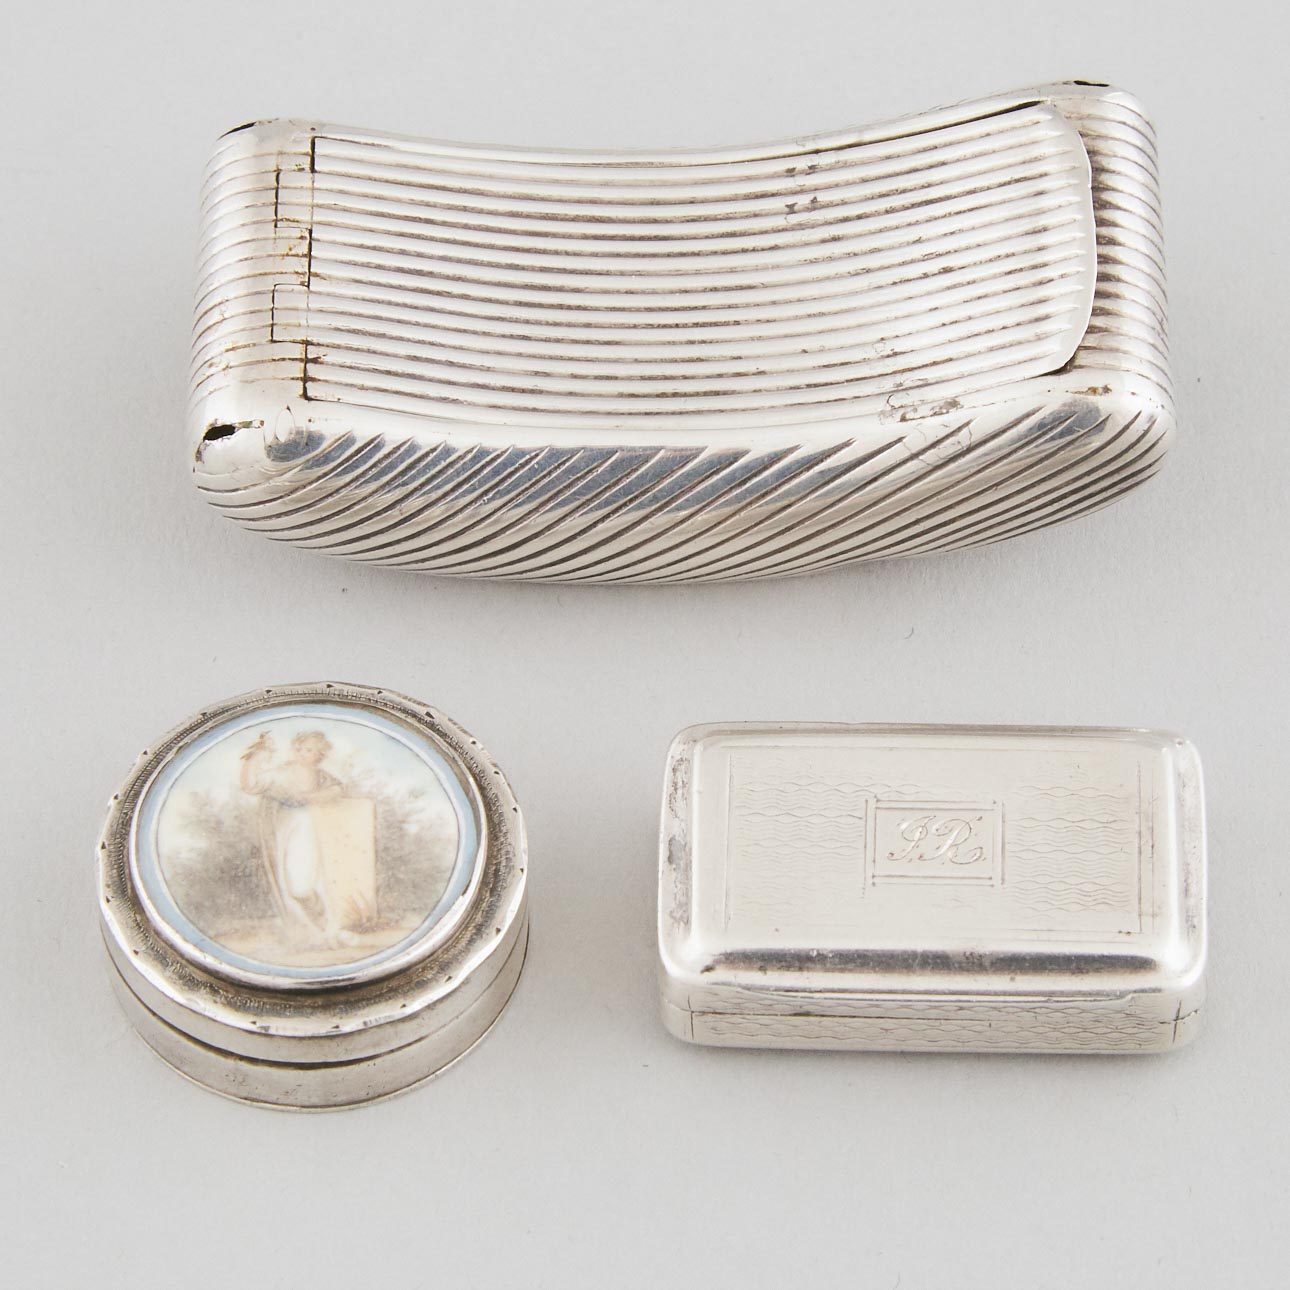 Two English Silver Snuff Boxes and a Vinaigrette, c,1810